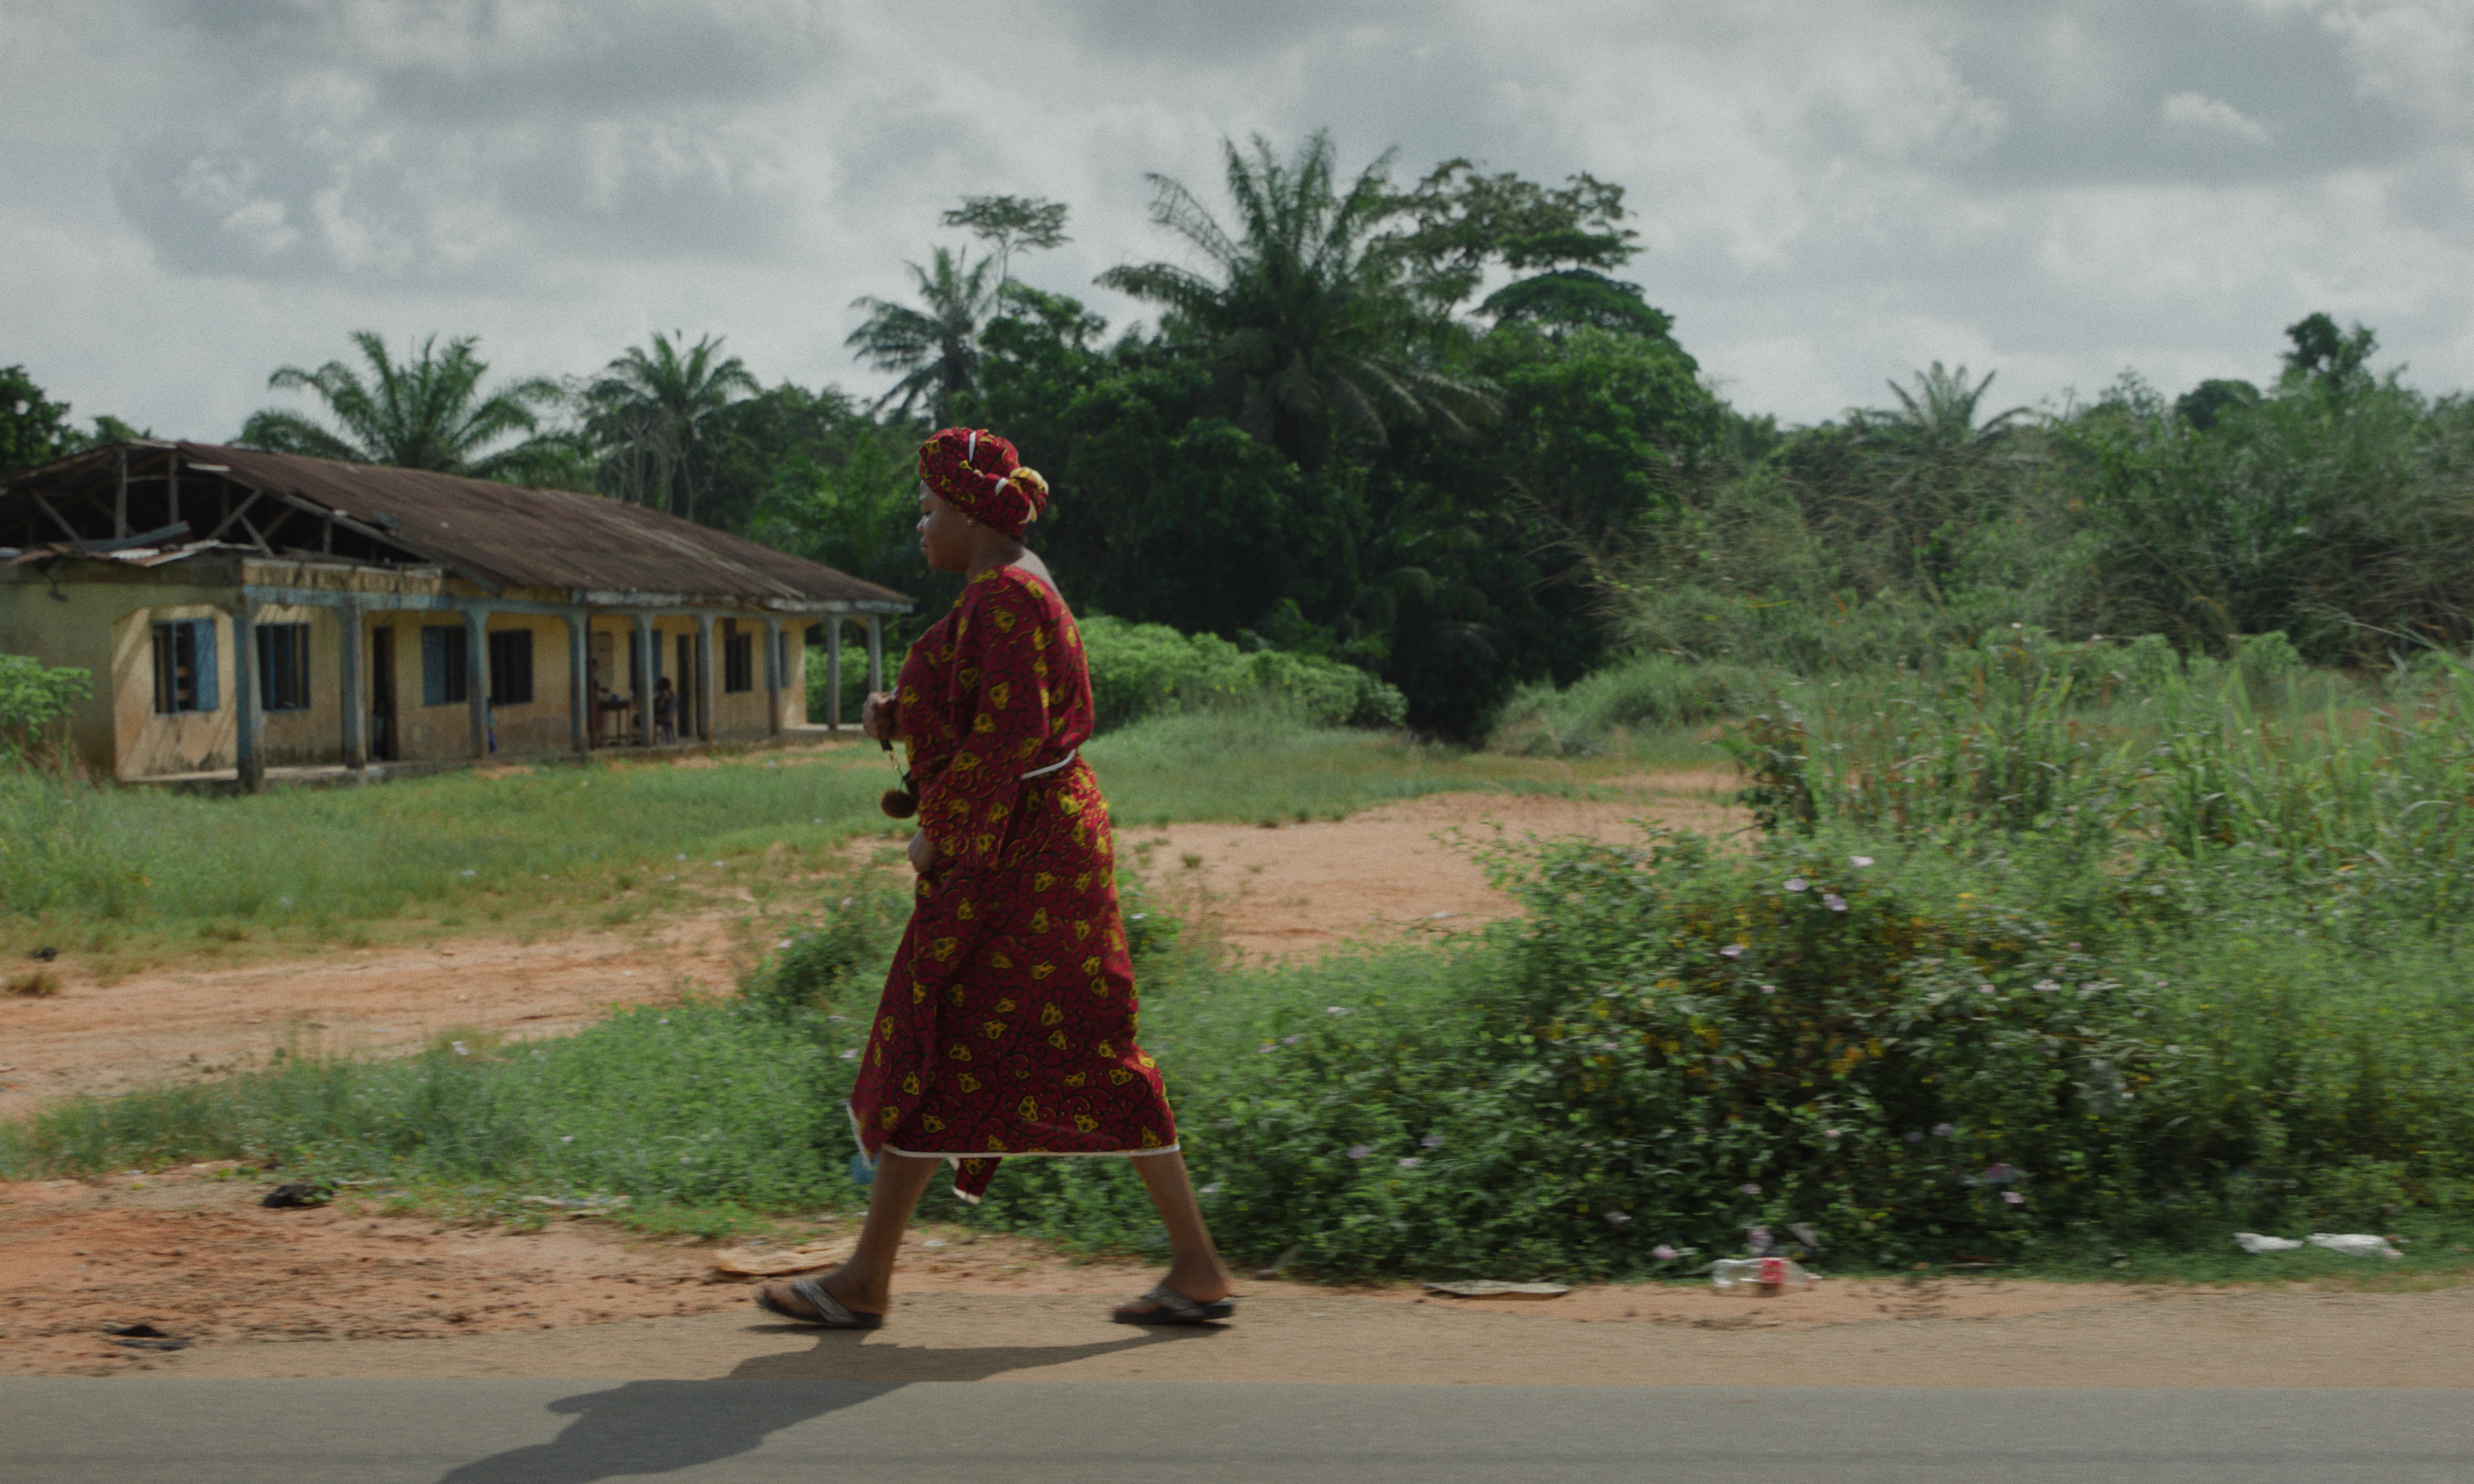 Woman walking along the village road, in the distance a lush green jungle.